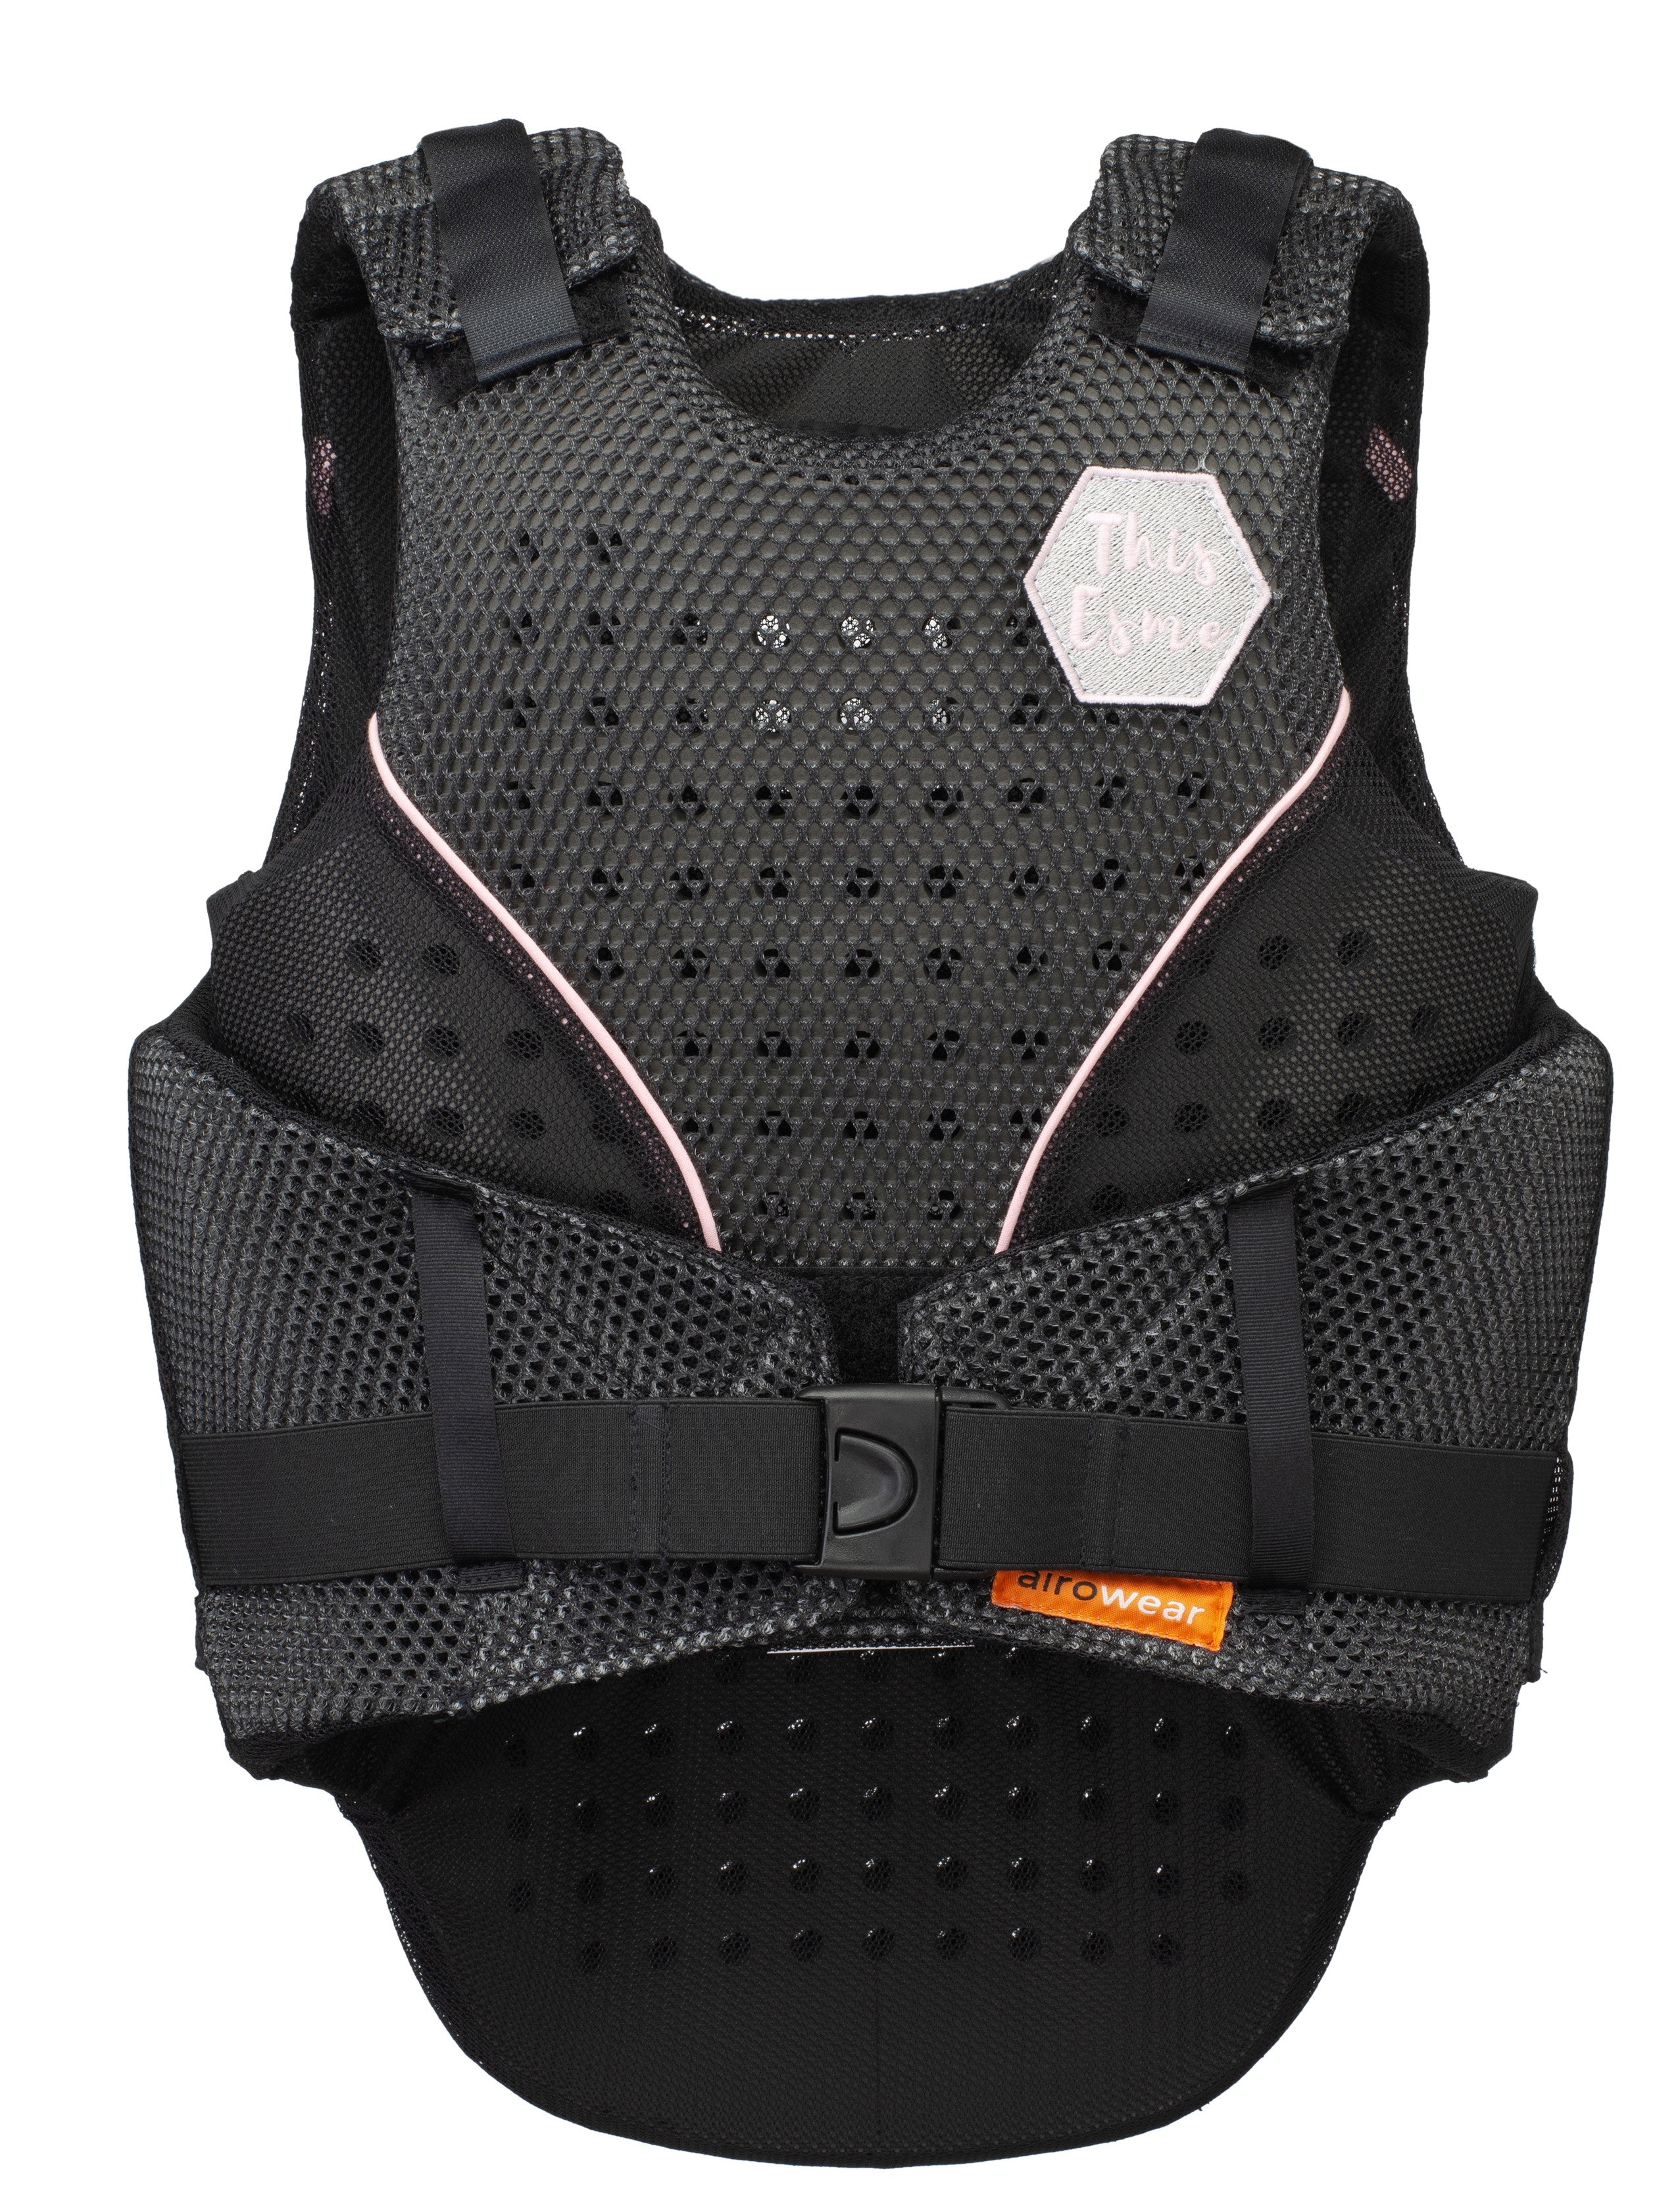 Airowear This Esme Adults Body Protector - Baby Pink